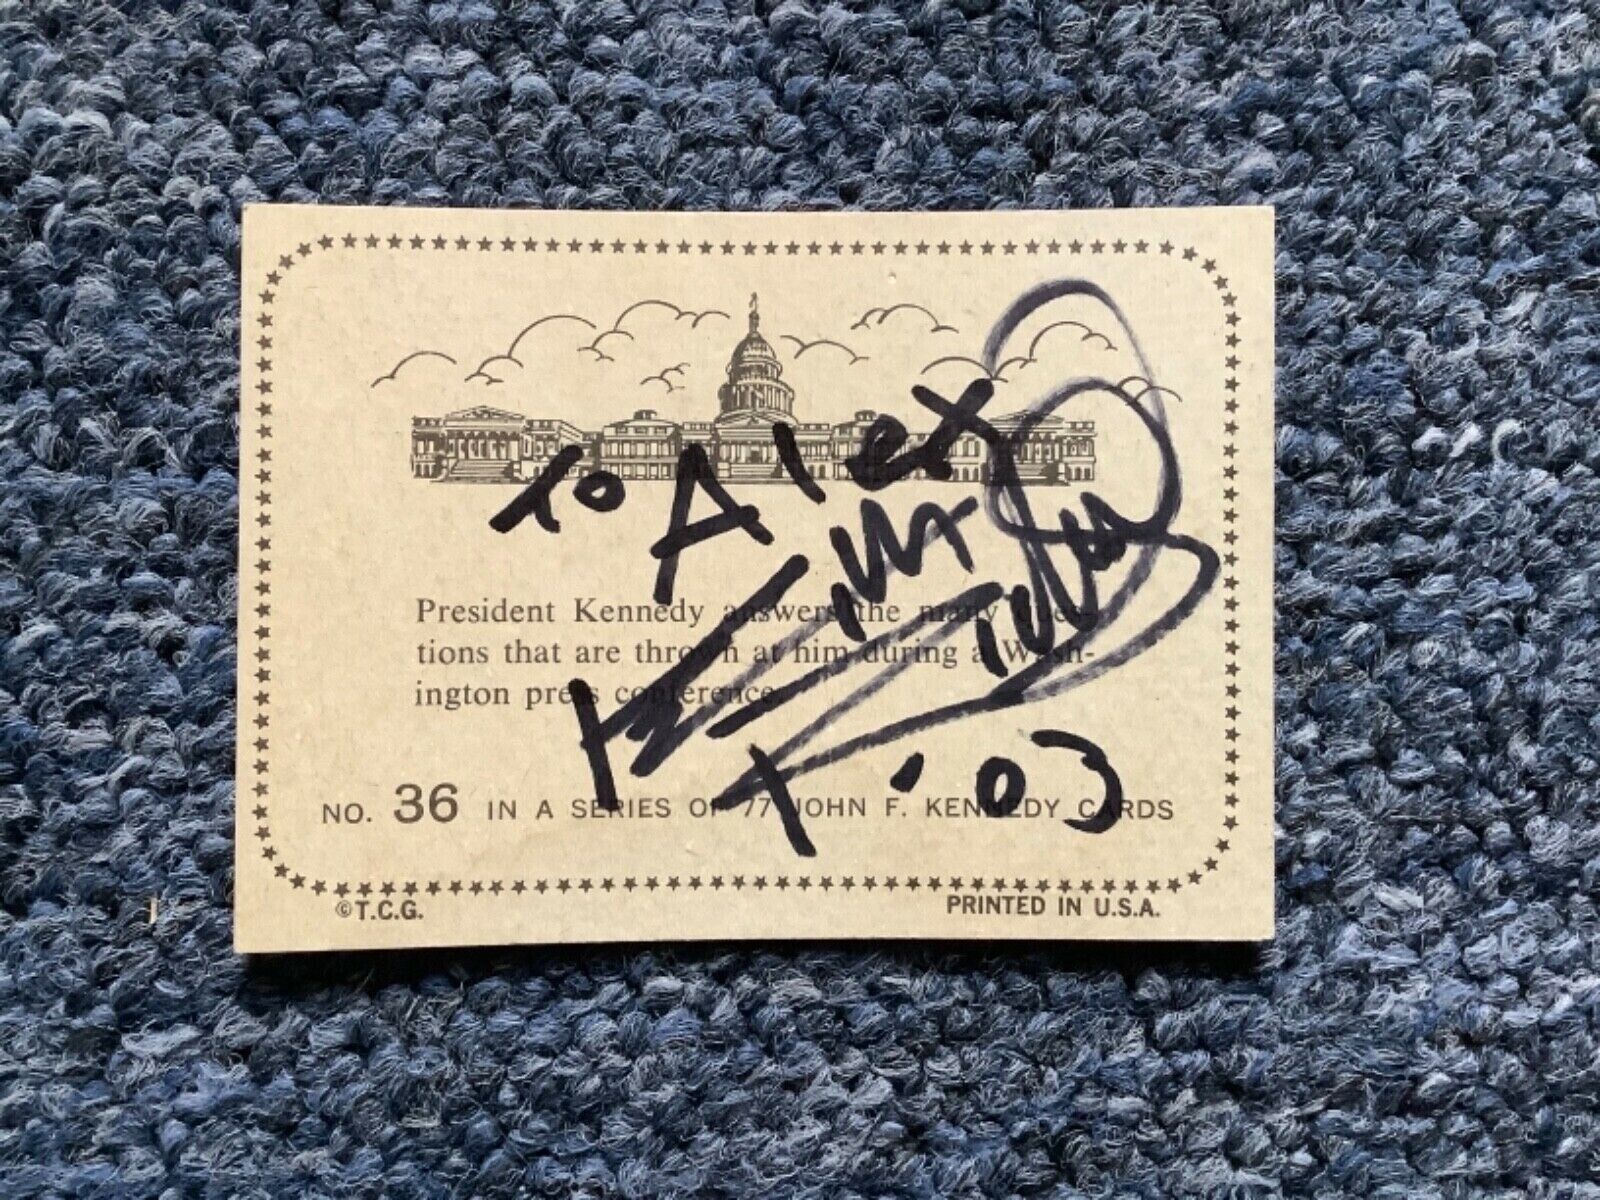 UNIQUE KEITH RICHARDS BOLD AUTOGRAPH(IN PERSON) on JFK TOPPS KENNEDY CARD